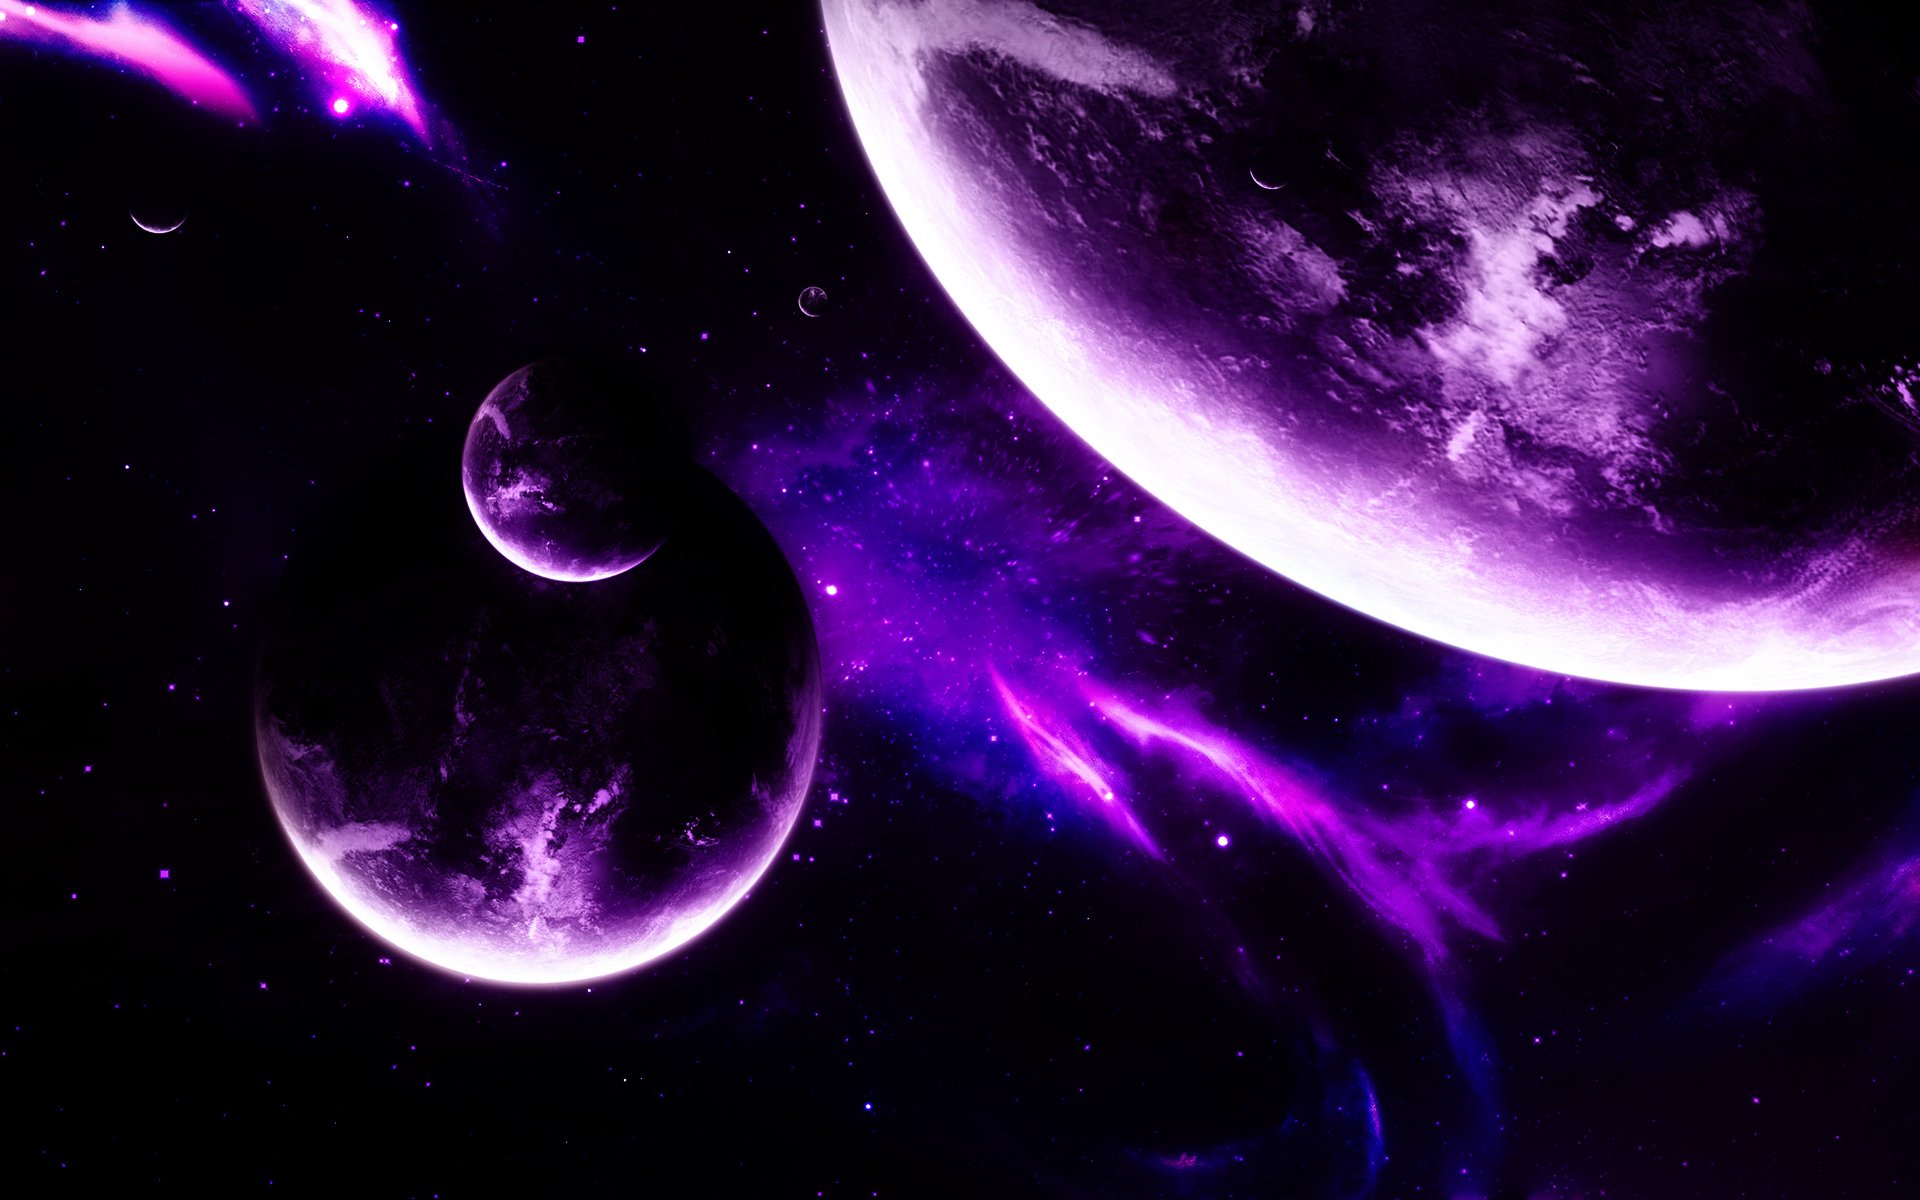 SpaceFantasy Wallpaper Set 25 Awesome Wallpapers